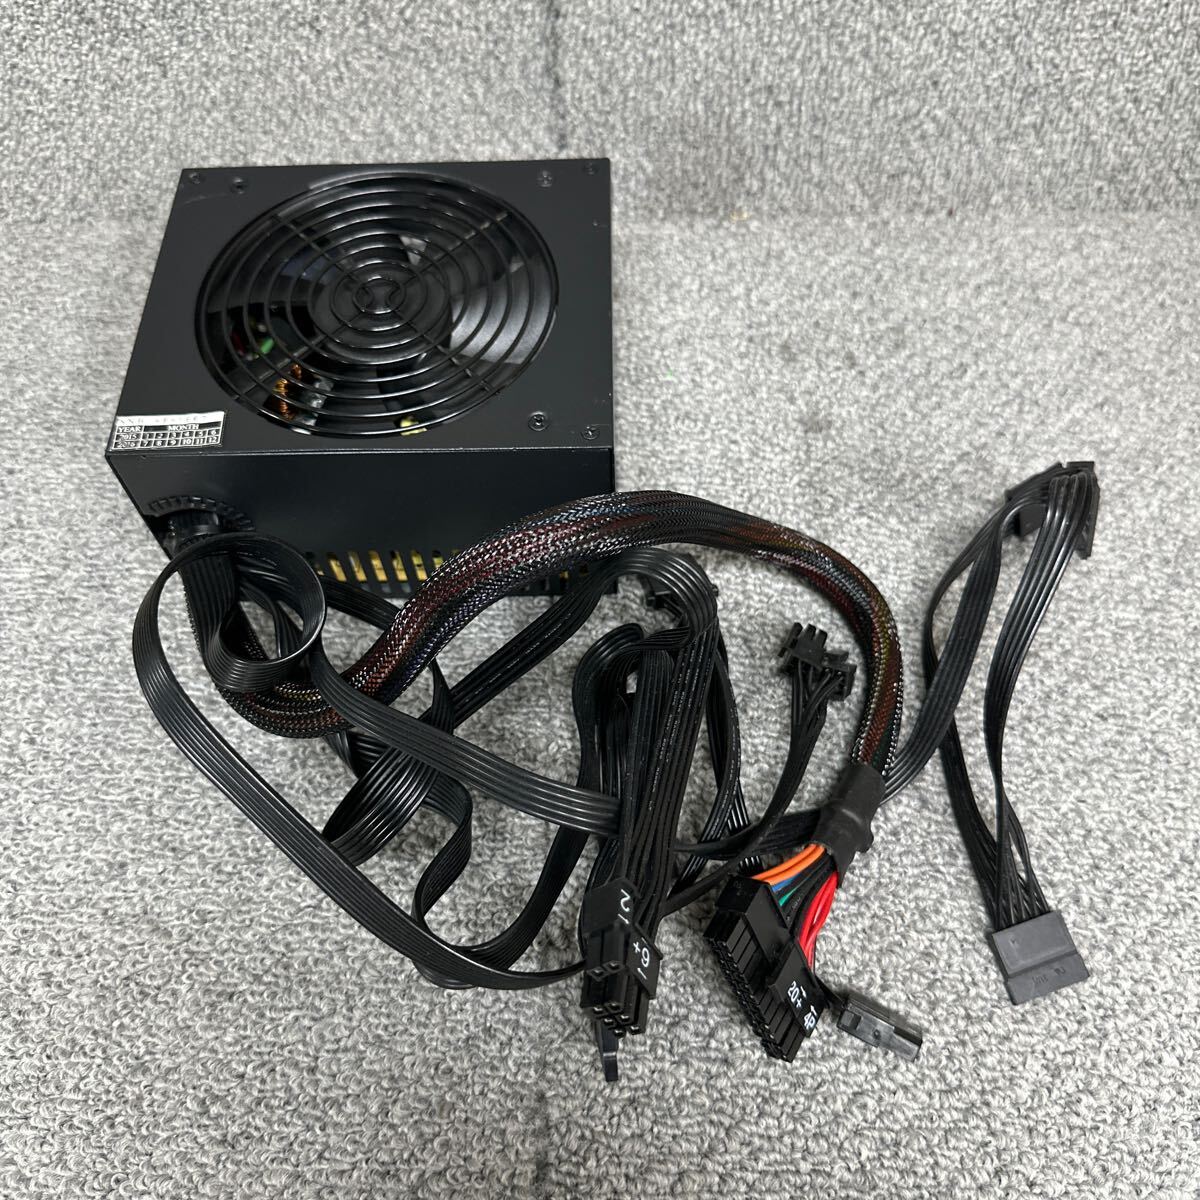 GK super-discount BOX-146 PC power supply BOX. person intention KRPW-N500W/85+ 500W 80PLUS BRONZE power supply unit voltage has confirmed secondhand goods 